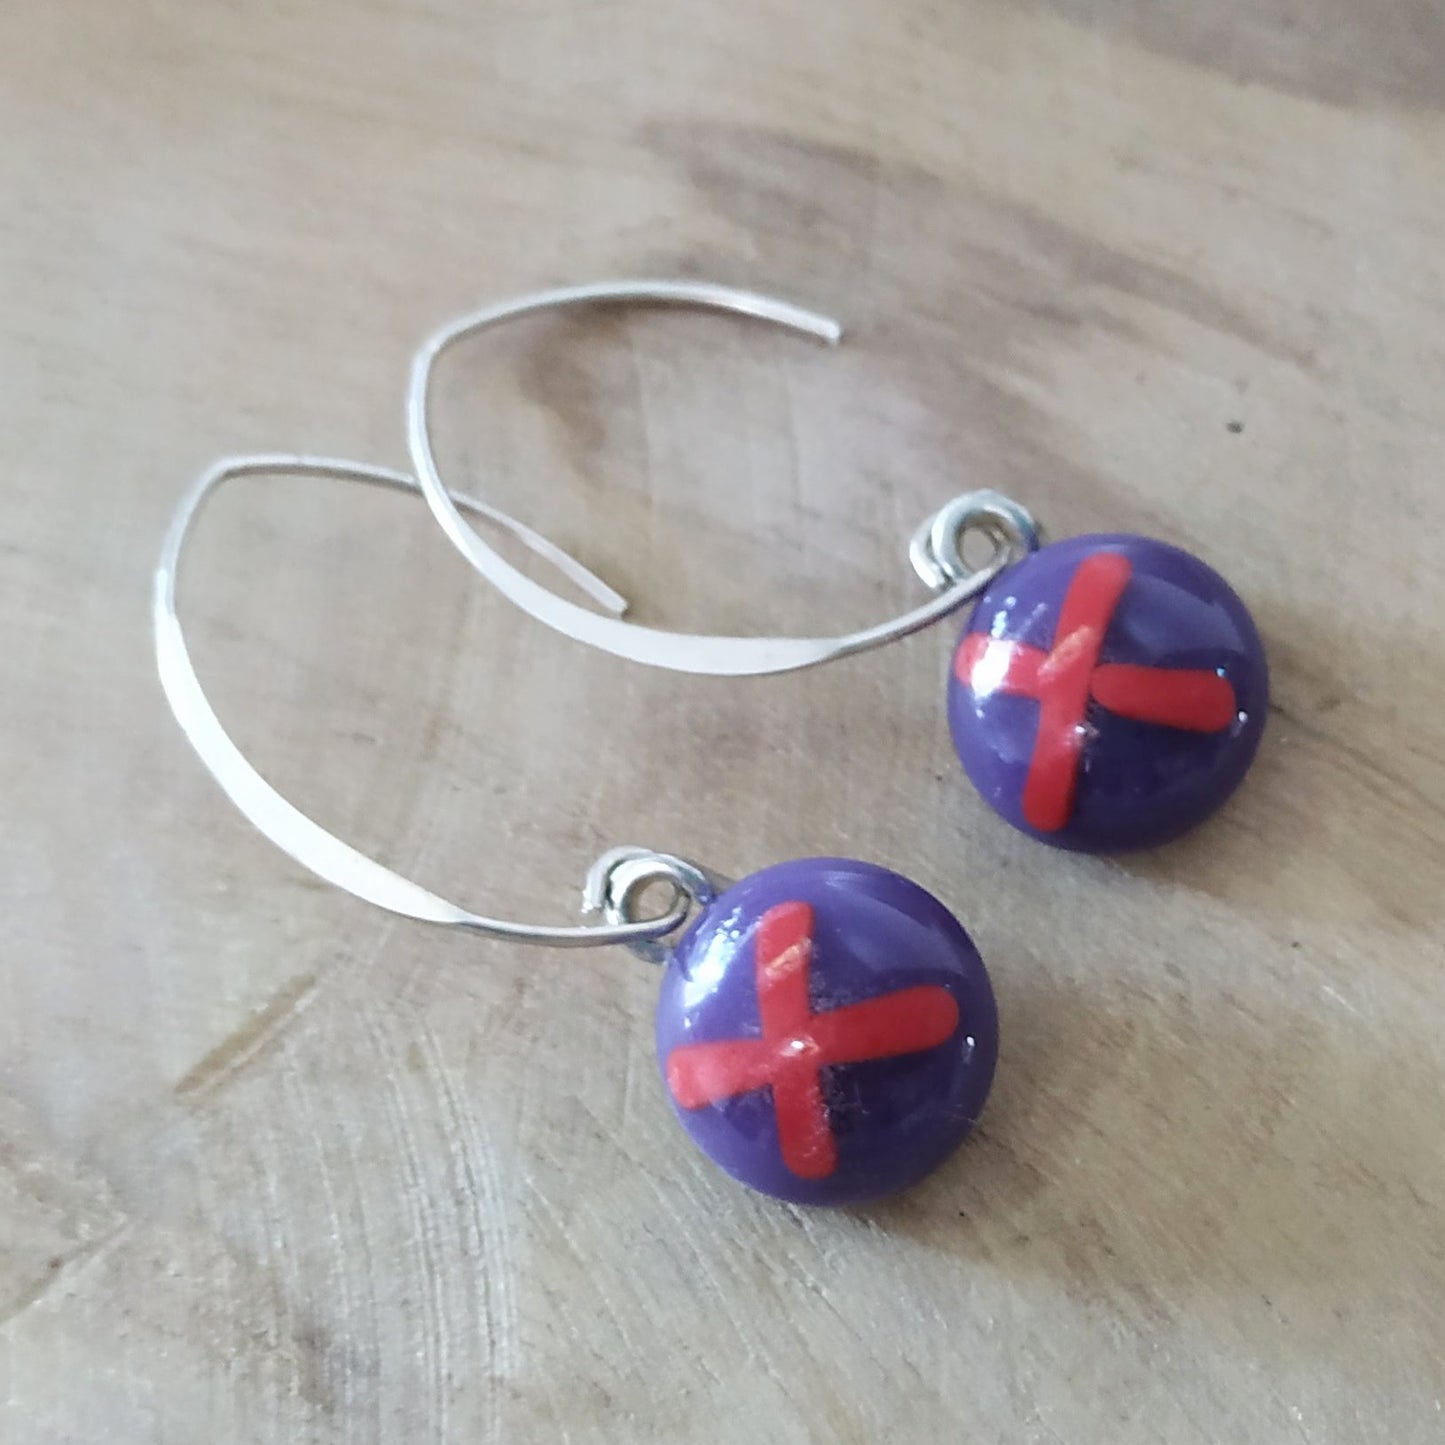 Purple with red x fused glass earrings with silver ear wires